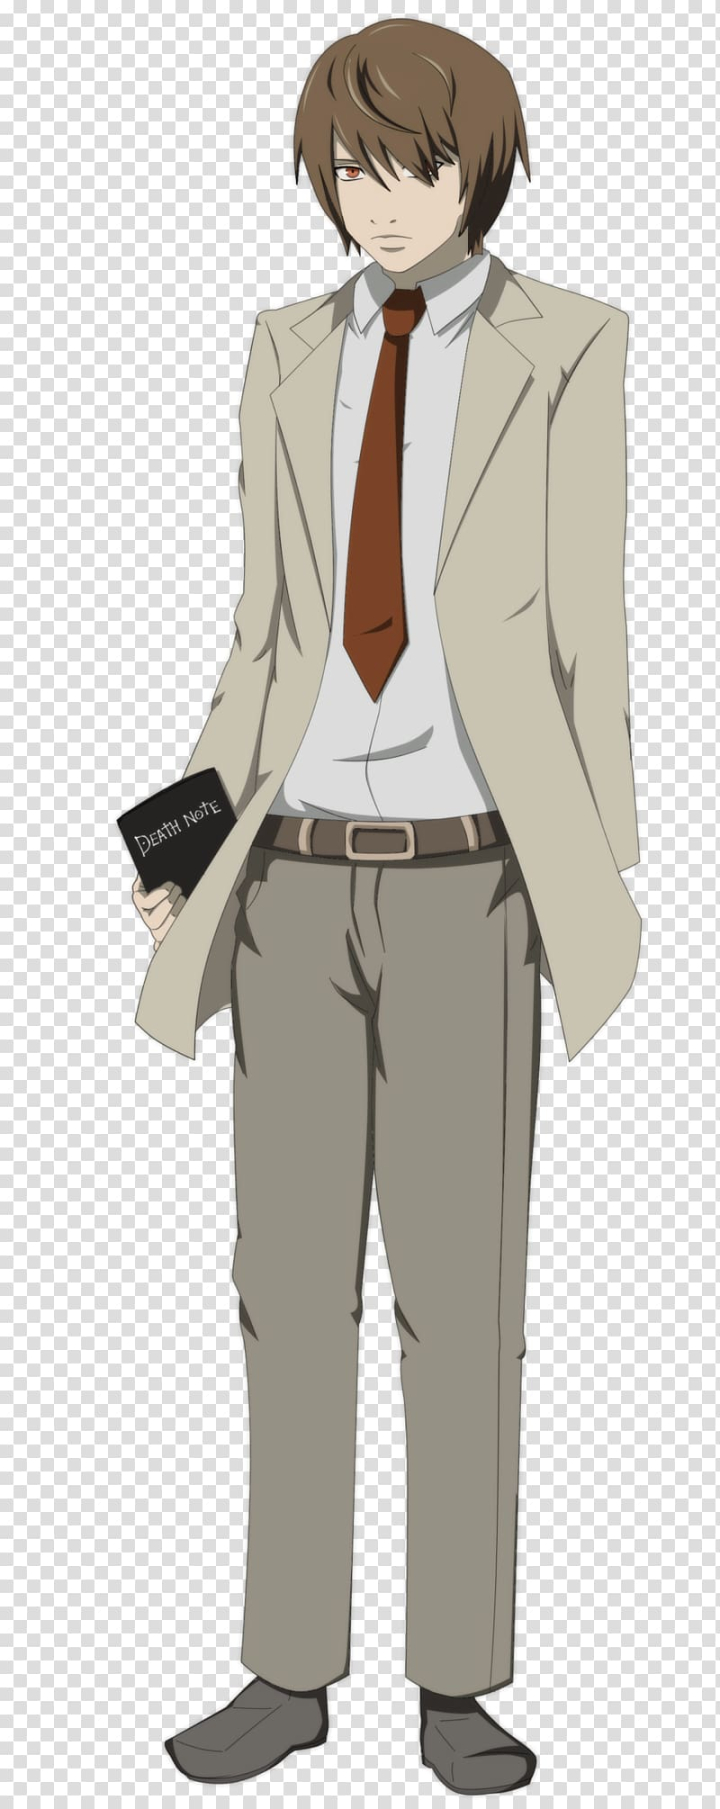 light,yagami,death,note,ryuk,character,body,miscellaneous,others,human,formal wear,death note,male,outerwear,animation,professional,standing,suit,tuxedo,light yagami,l,anime,cool,costume,costume design,drawing,gentleman,human behavior,joint,uniform,png clipart,free png,transparent background,free clipart,clip art,free download,png,comhiclipart